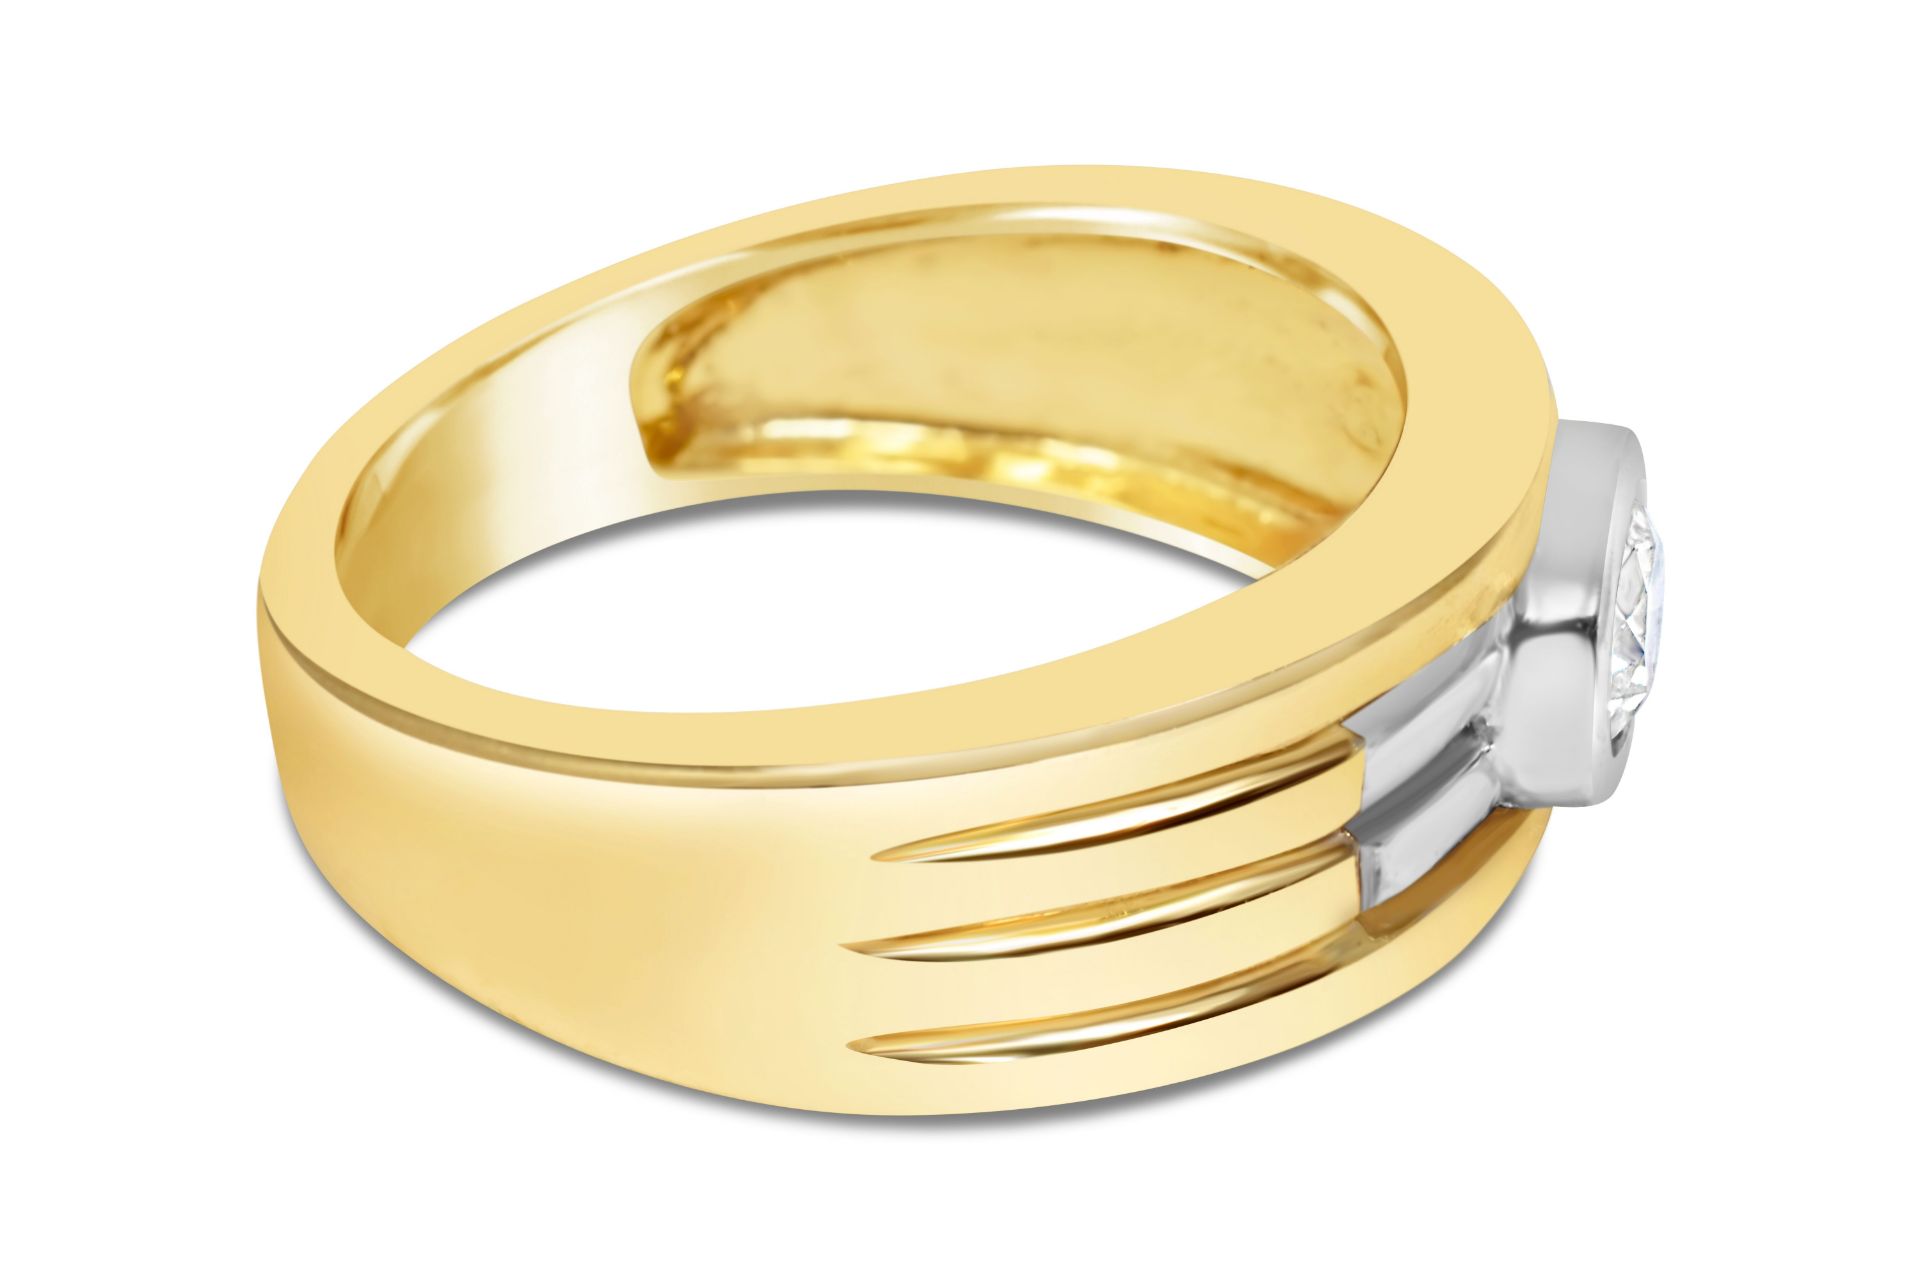 Wide Band Diamond Ring, 9ct Yellow Gold, RRP £2,299 Weight 5.38g, Diamond Weight 0.34ct, Colour H,